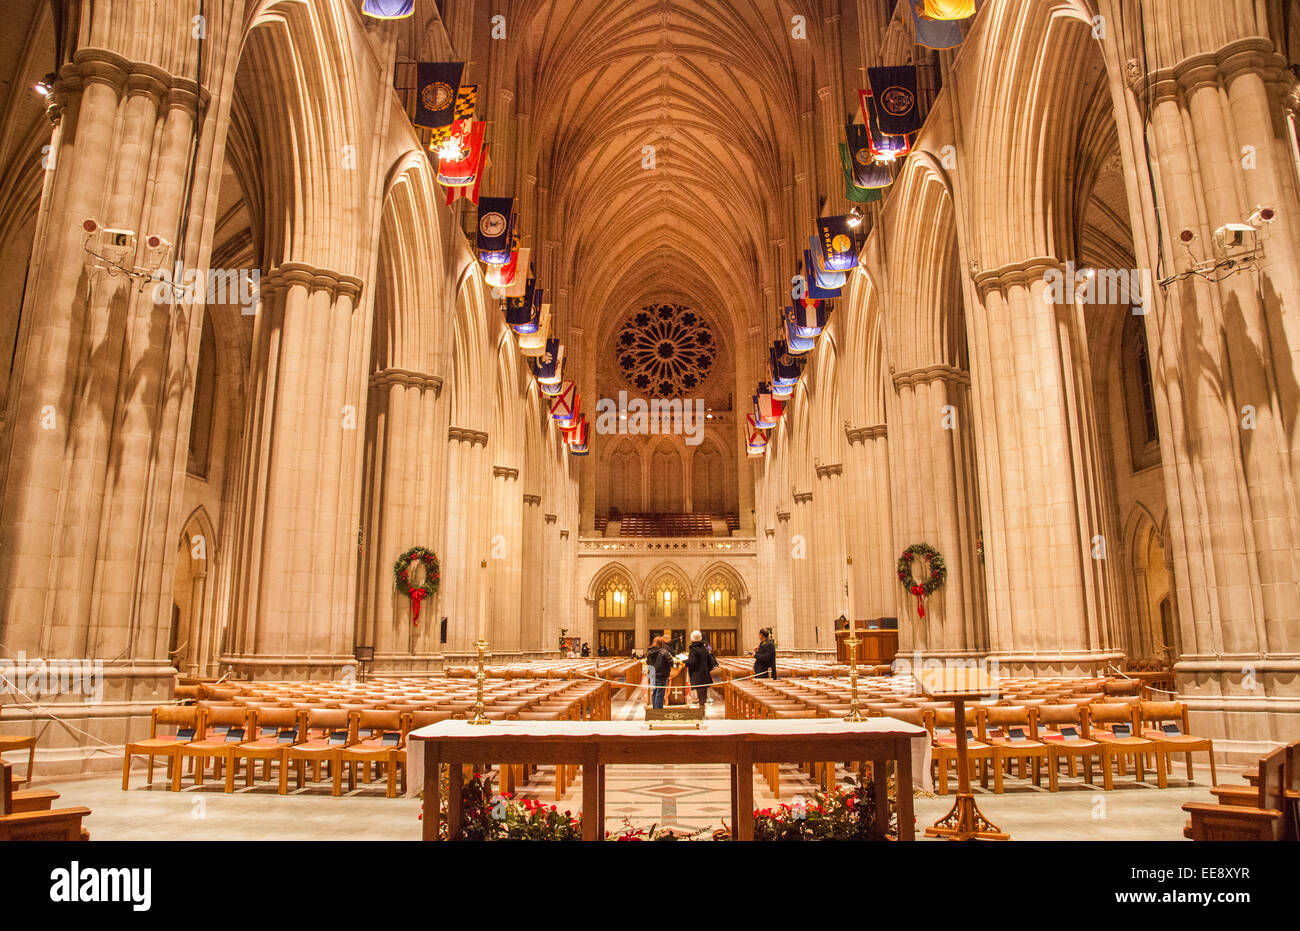 Washington National Cathedral or the Cathedral Church of Saint Peter and Saint Paul in the City and Diocese of Washington, Stock Photo